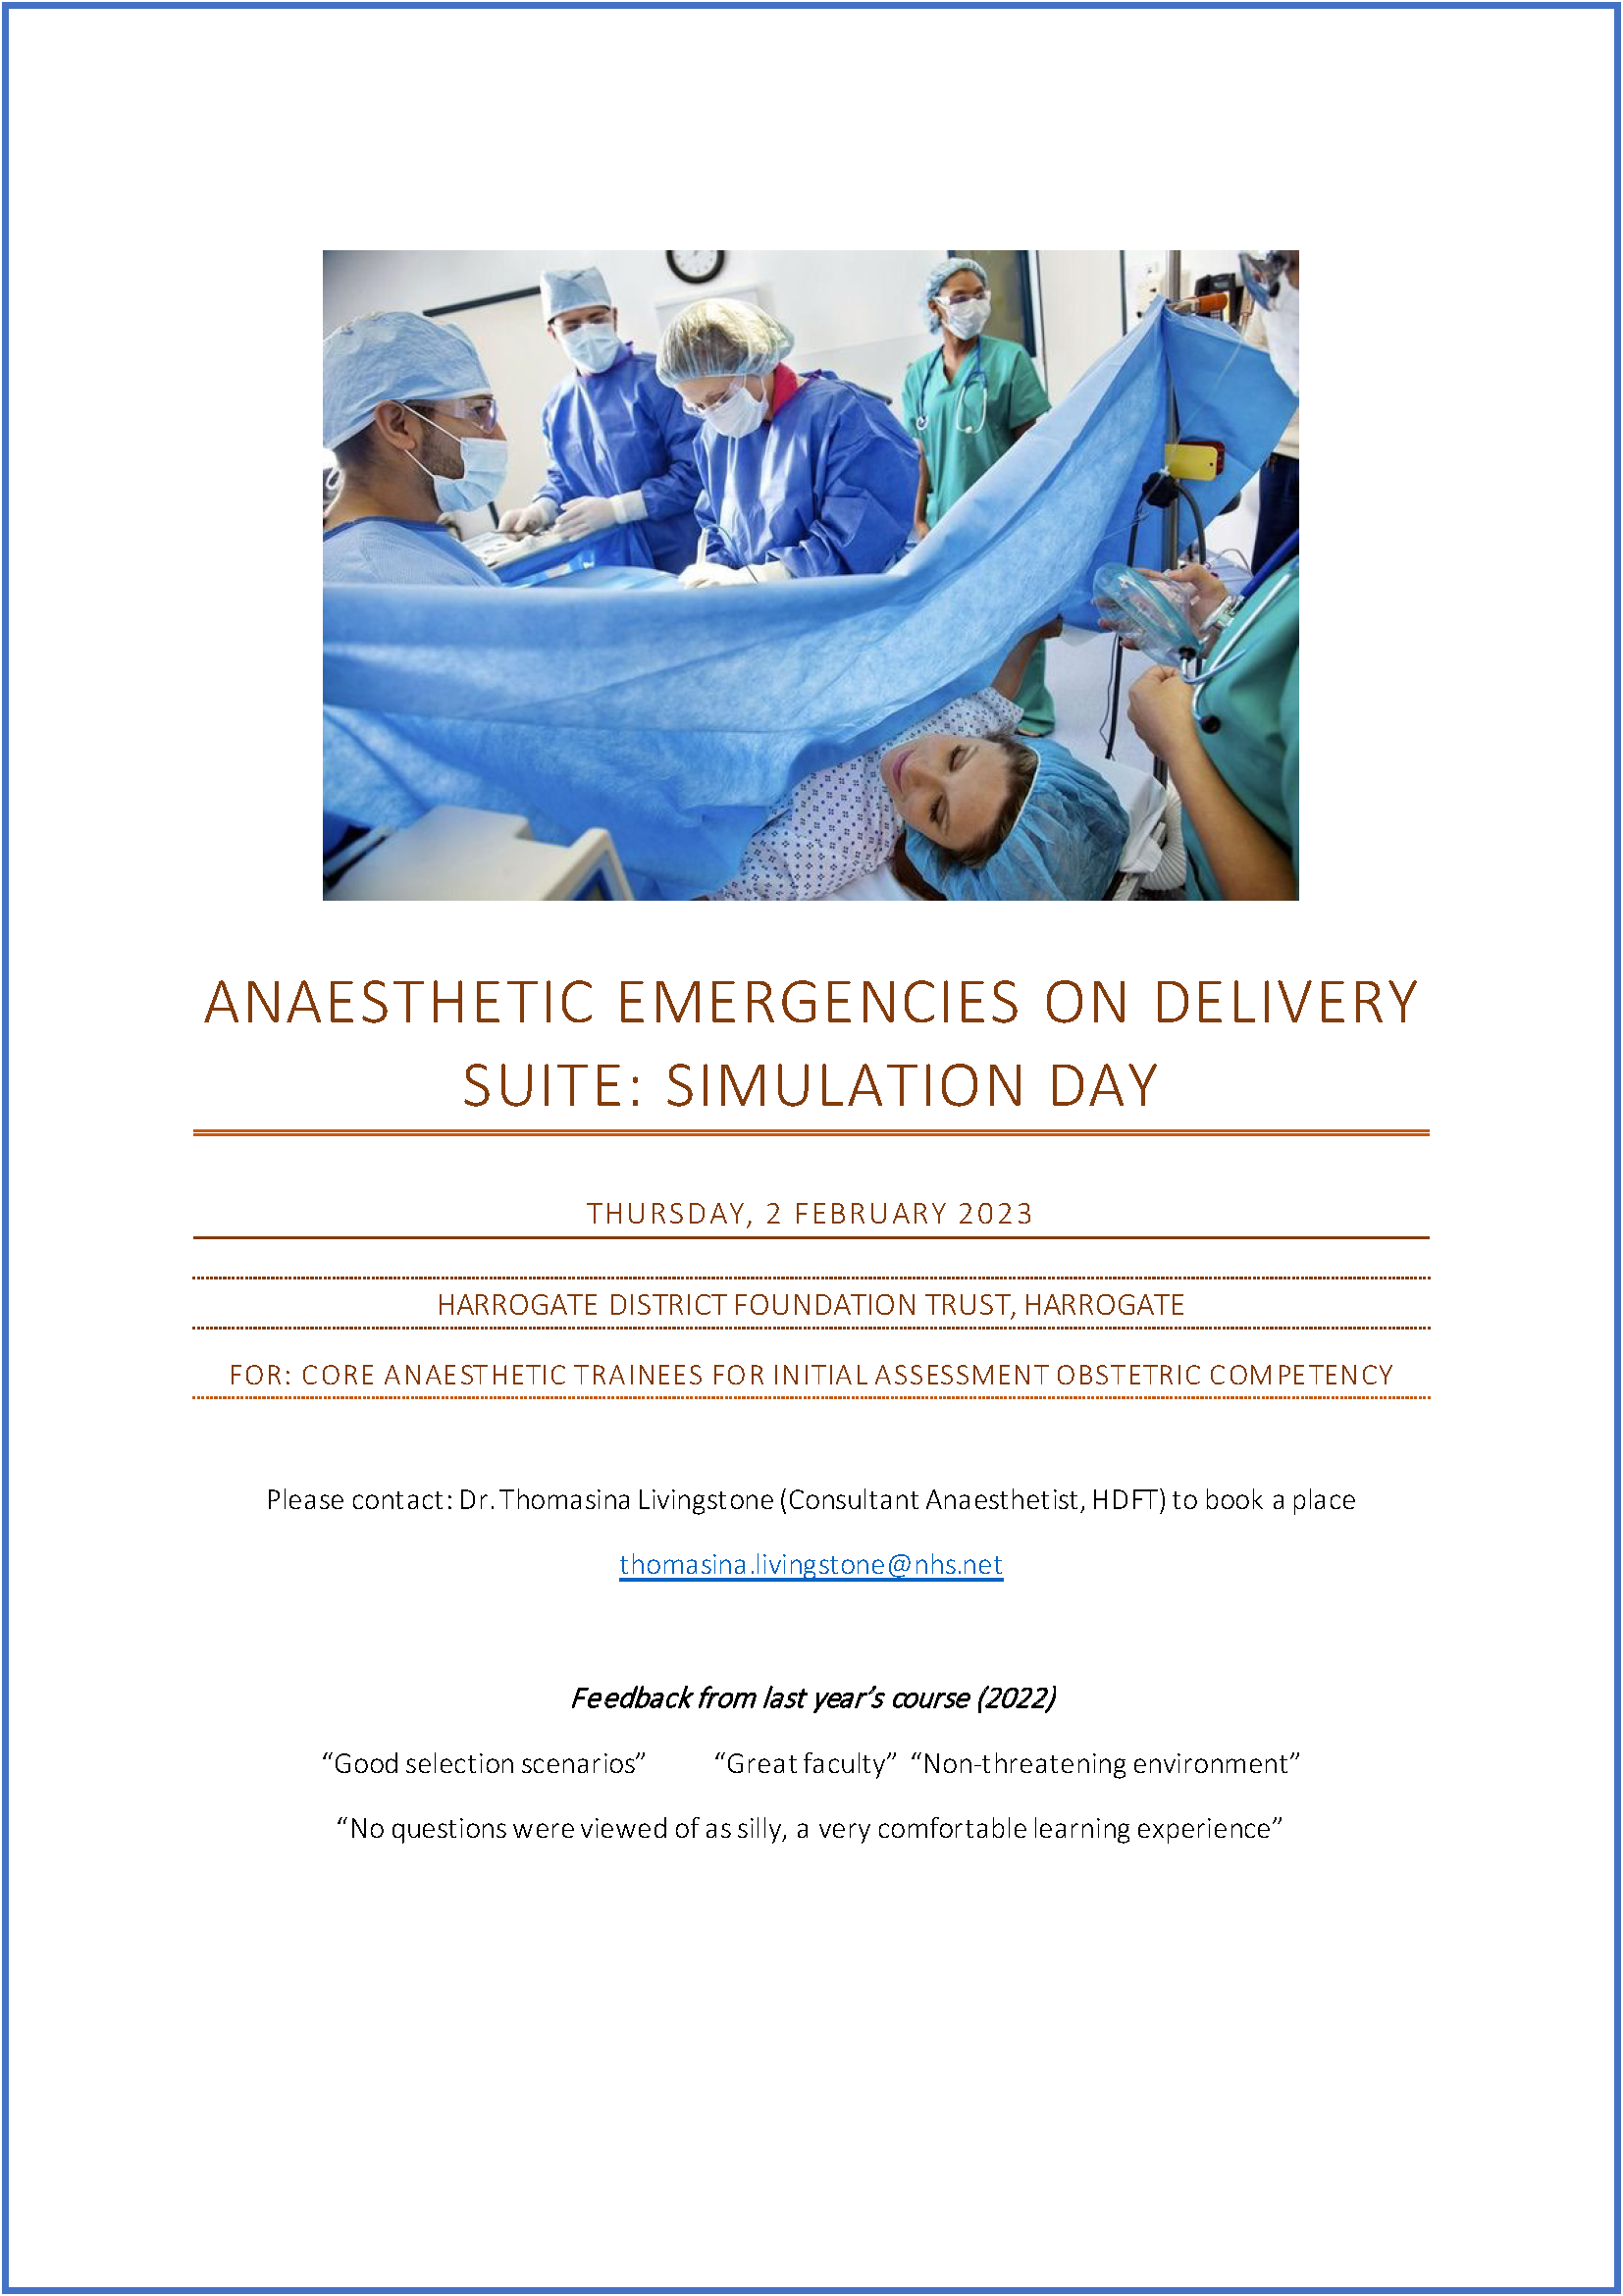 poster_anaesthetic_emergencies_delivery_suite_2023_0.png